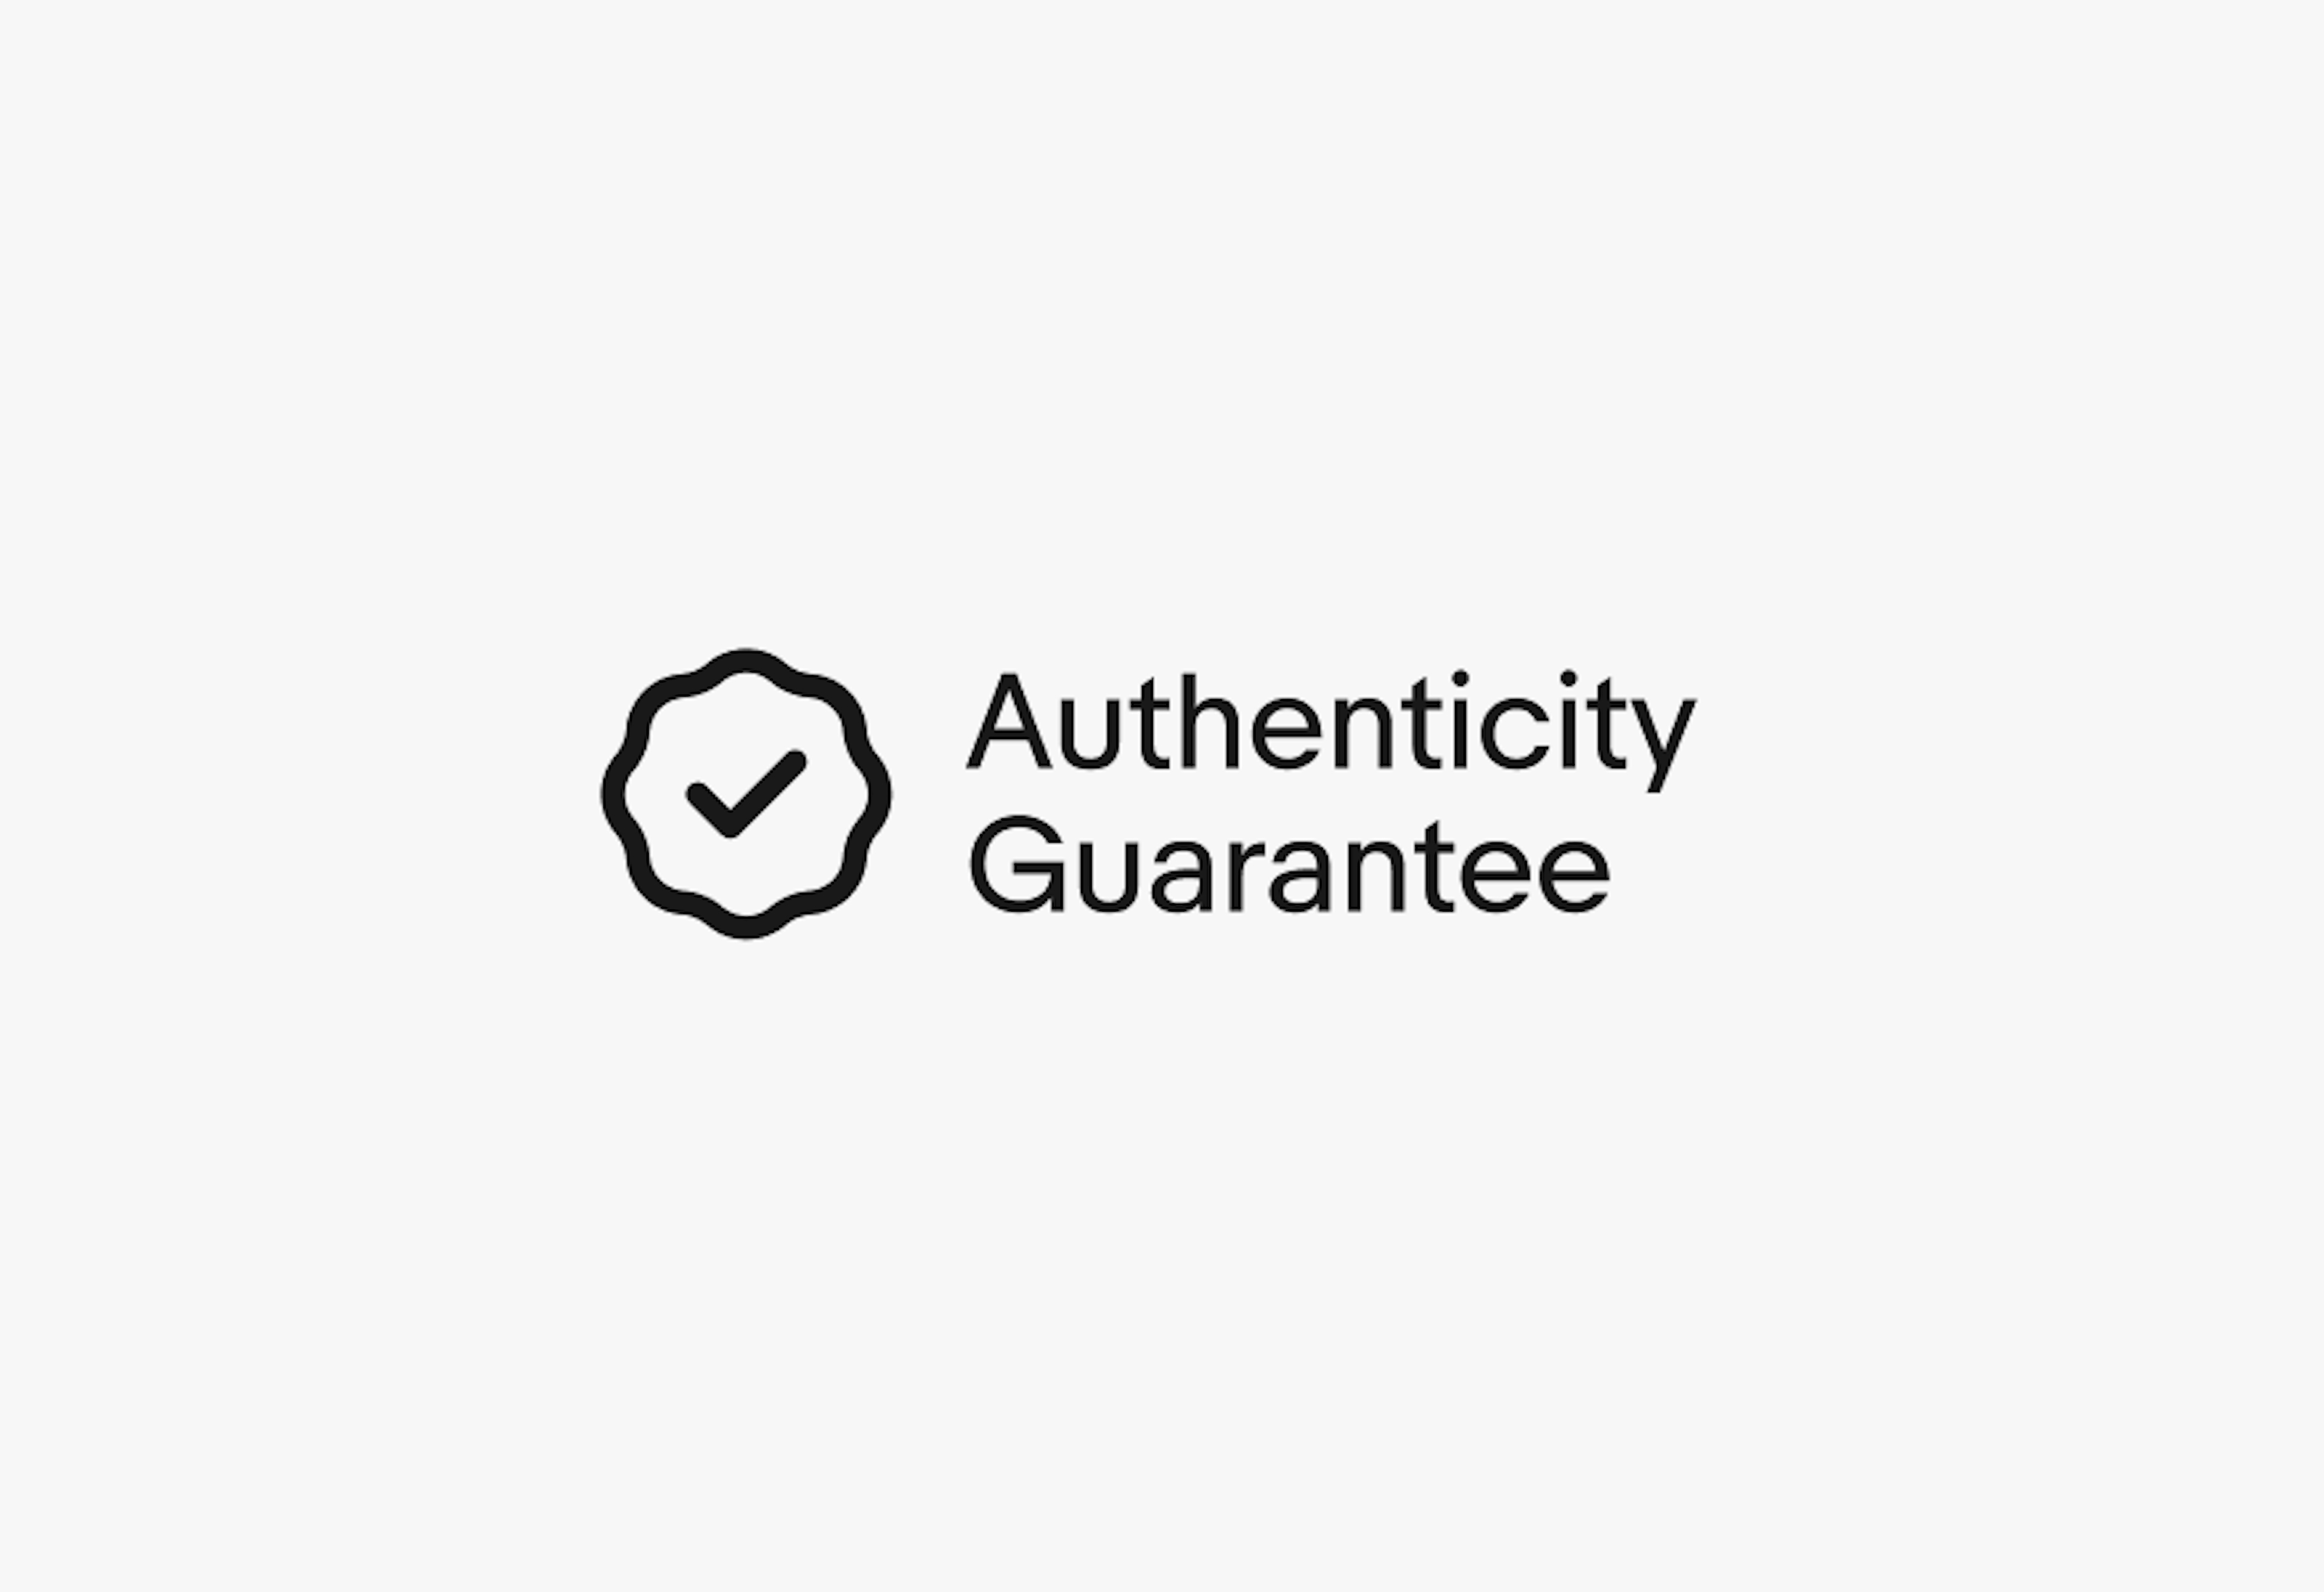 A double line program lockup for Authenticity Guarantee. The icon is large and to the left of two lines of text.